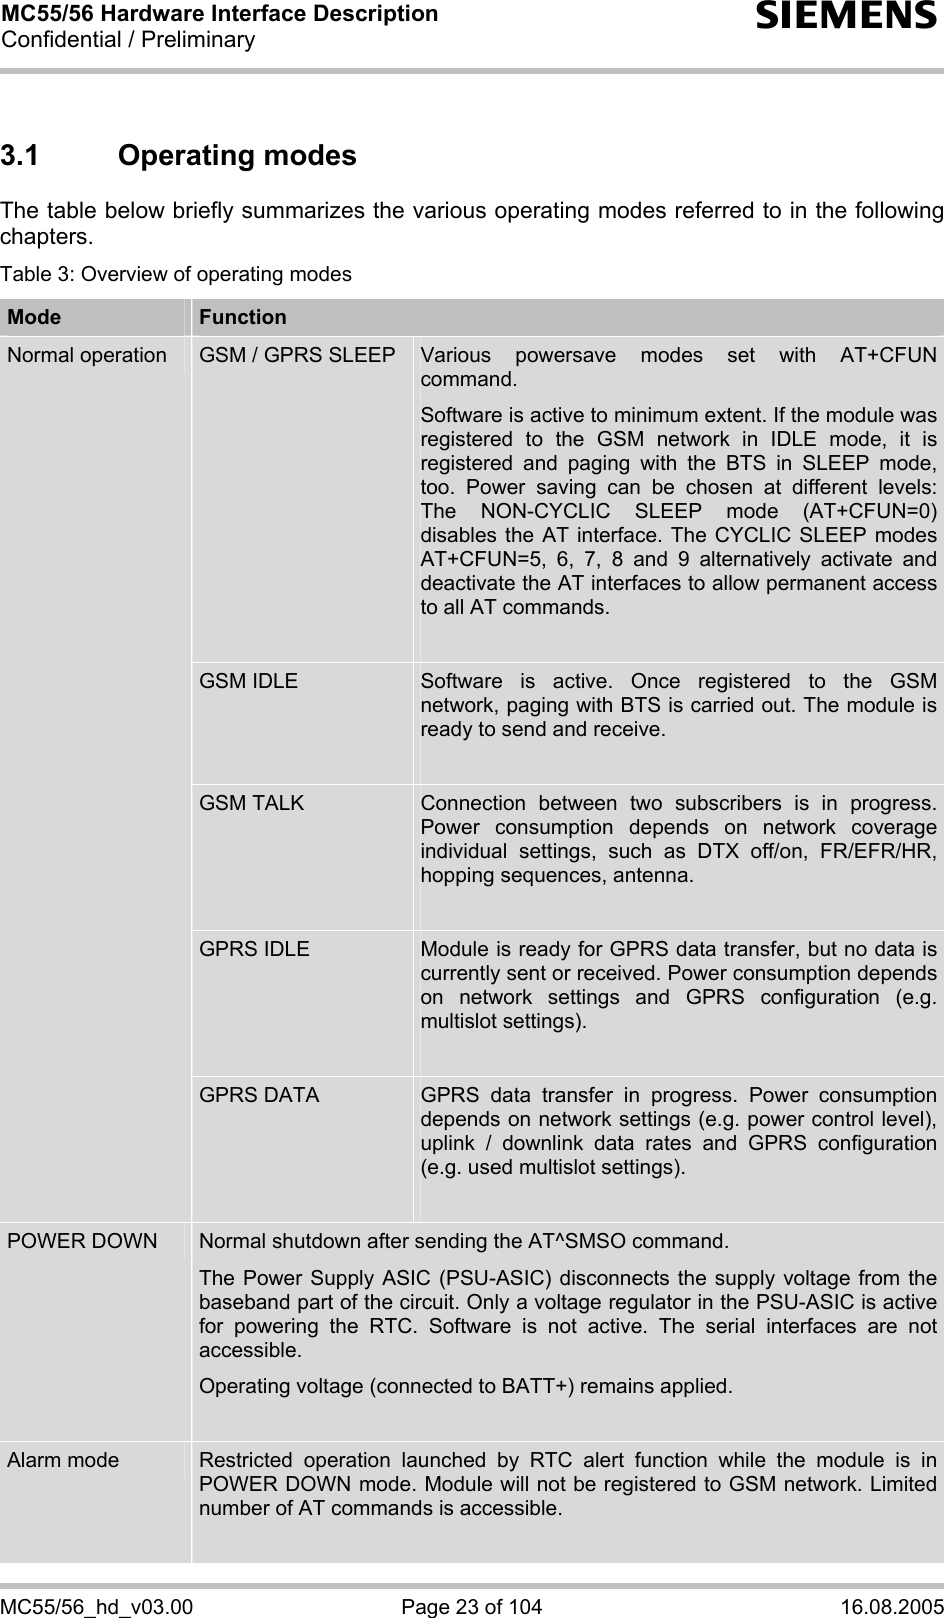 MC55/56 Hardware Interface Description Confidential / Preliminary s MC55/56_hd_v03.00  Page 23 of 104  16.08.2005 3.1 Operating modes The table below briefly summarizes the various operating modes referred to in the following chapters.  Table 3: Overview of operating modes Mode  Function GSM / GPRS SLEEP  Various powersave modes set with AT+CFUN command.  Software is active to minimum extent. If the module was registered to the GSM network in IDLE mode, it is registered and paging with the BTS in SLEEP mode, too. Power saving can be chosen at different levels: The NON-CYCLIC SLEEP mode (AT+CFUN=0) disables the AT interface. The CYCLIC SLEEP modes AT+CFUN=5, 6, 7, 8 and 9 alternatively activate and deactivate the AT interfaces to allow permanent access to all AT commands.  GSM IDLE  Software is active. Once registered to the GSM network, paging with BTS is carried out. The module is ready to send and receive.  GSM TALK  Connection between two subscribers is in progress. Power consumption depends on network coverage individual settings, such as DTX off/on, FR/EFR/HR, hopping sequences, antenna.  GPRS IDLE  Module is ready for GPRS data transfer, but no data is currently sent or received. Power consumption depends on network settings and GPRS configuration (e.g. multislot settings).  Normal operation GPRS DATA  GPRS data transfer in progress. Power consumption depends on network settings (e.g. power control level), uplink / downlink data rates and GPRS configuration (e.g. used multislot settings).  POWER DOWN  Normal shutdown after sending the AT^SMSO command.  The Power Supply ASIC (PSU-ASIC) disconnects the supply voltage from the baseband part of the circuit. Only a voltage regulator in the PSU-ASIC is active for powering the RTC. Software is not active. The serial interfaces are not accessible.  Operating voltage (connected to BATT+) remains applied.  Alarm mode  Restricted operation launched by RTC alert function while the module is in POWER DOWN mode. Module will not be registered to GSM network. Limited number of AT commands is accessible.   